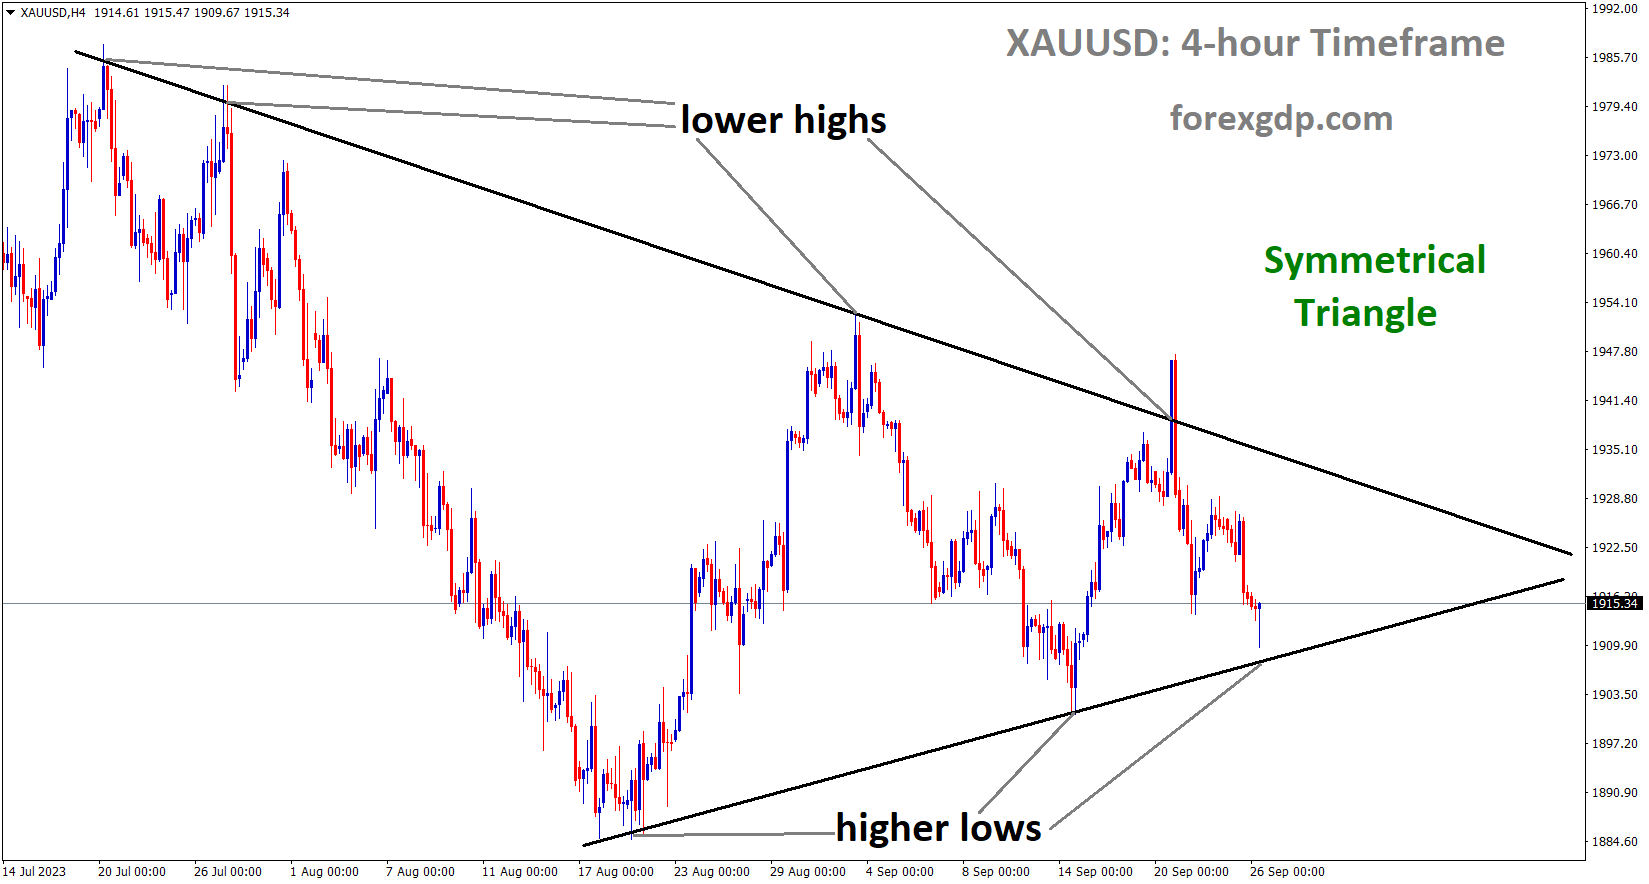 XAUUSD Gold price is moving in the Symmetrical triangle pattern and the market has reached the bottom area of the pattern.